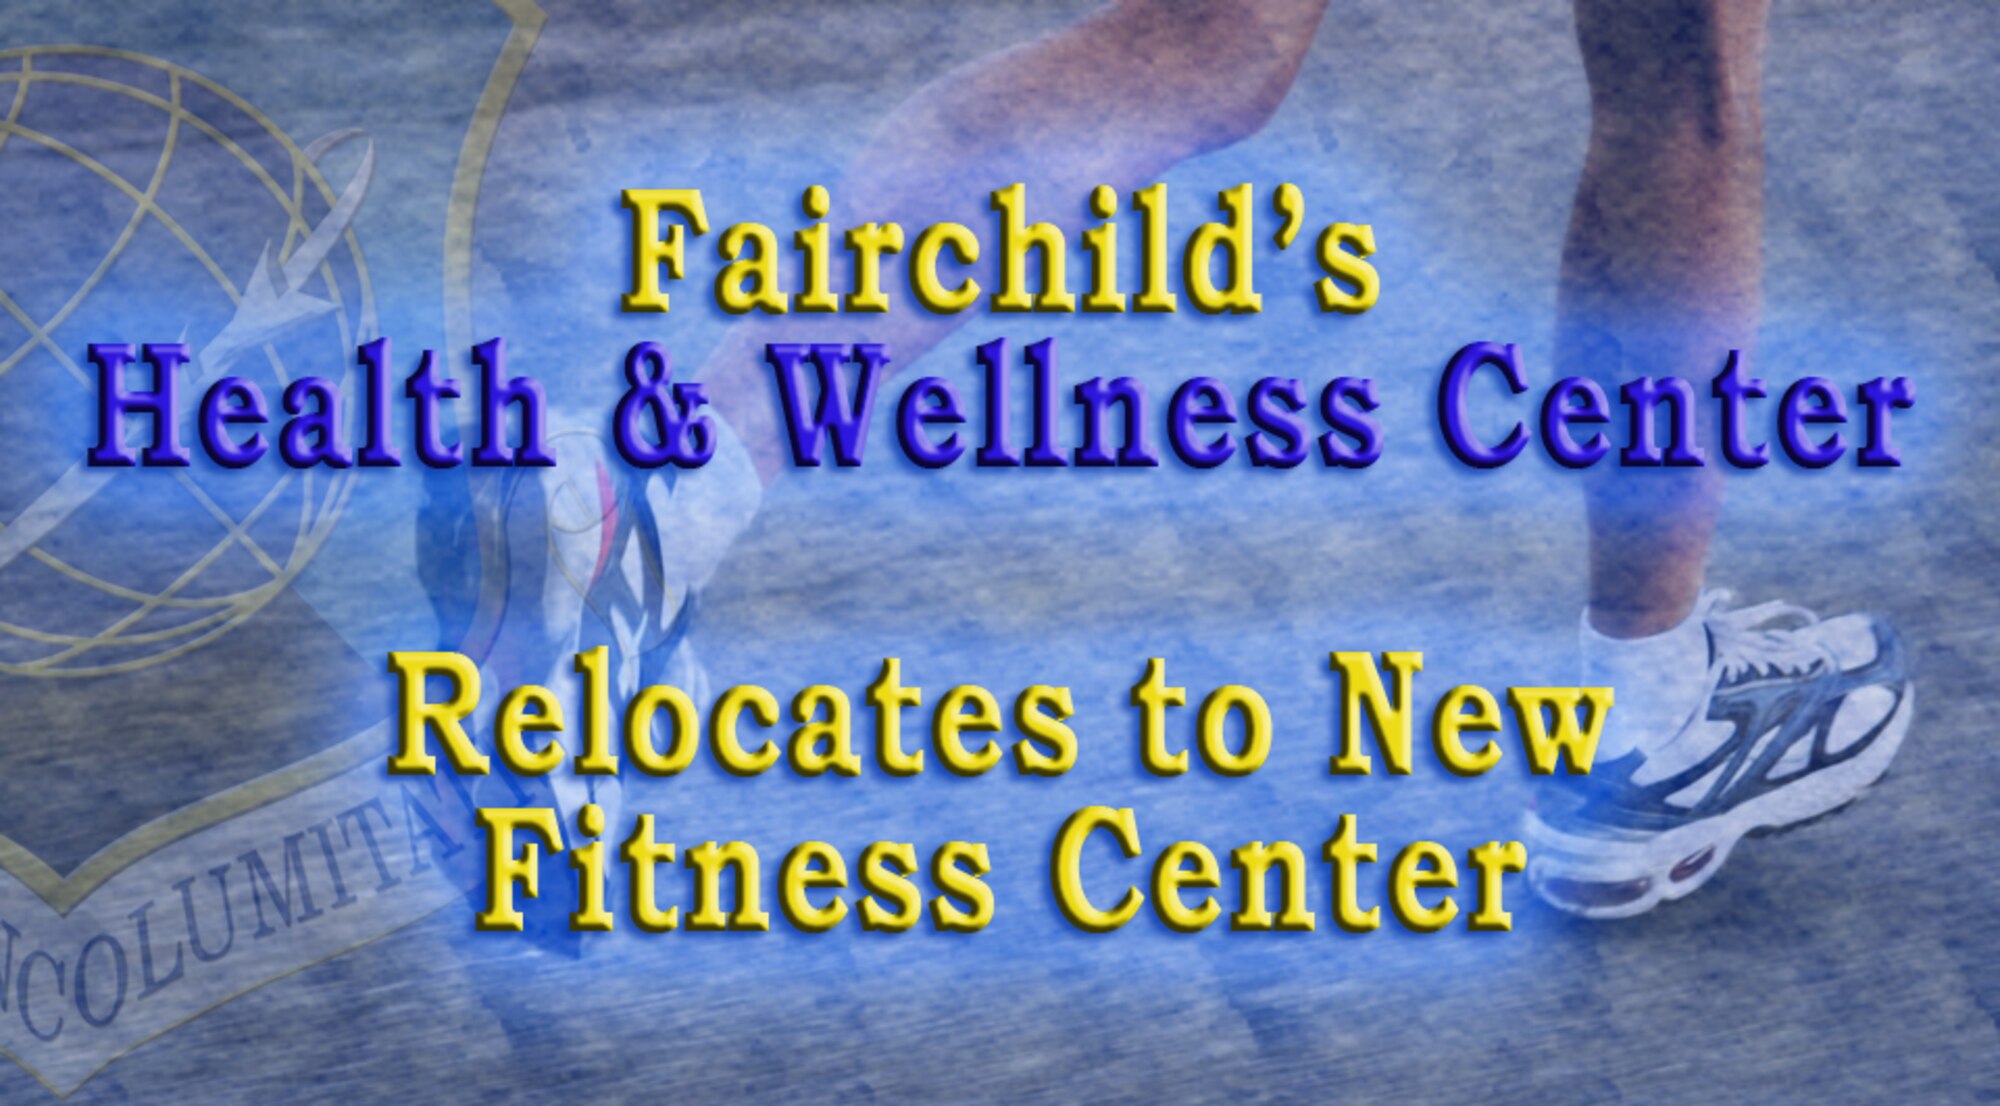 The Health and Wellness Center is now conveniently co-located within the new fitness center, thus providing greater exposure, convenience and utilization to the health and wellness resources offered to those that have access to Fairchild Air Force Base, Wash. The HAWC’s new hours of operation are Monday through Friday from 7:30 a.m. to 4:30 p.m. For more information call 247-5590. (U.S. Air Force graphic by Senior Airman Benjamin Stratton/Released)